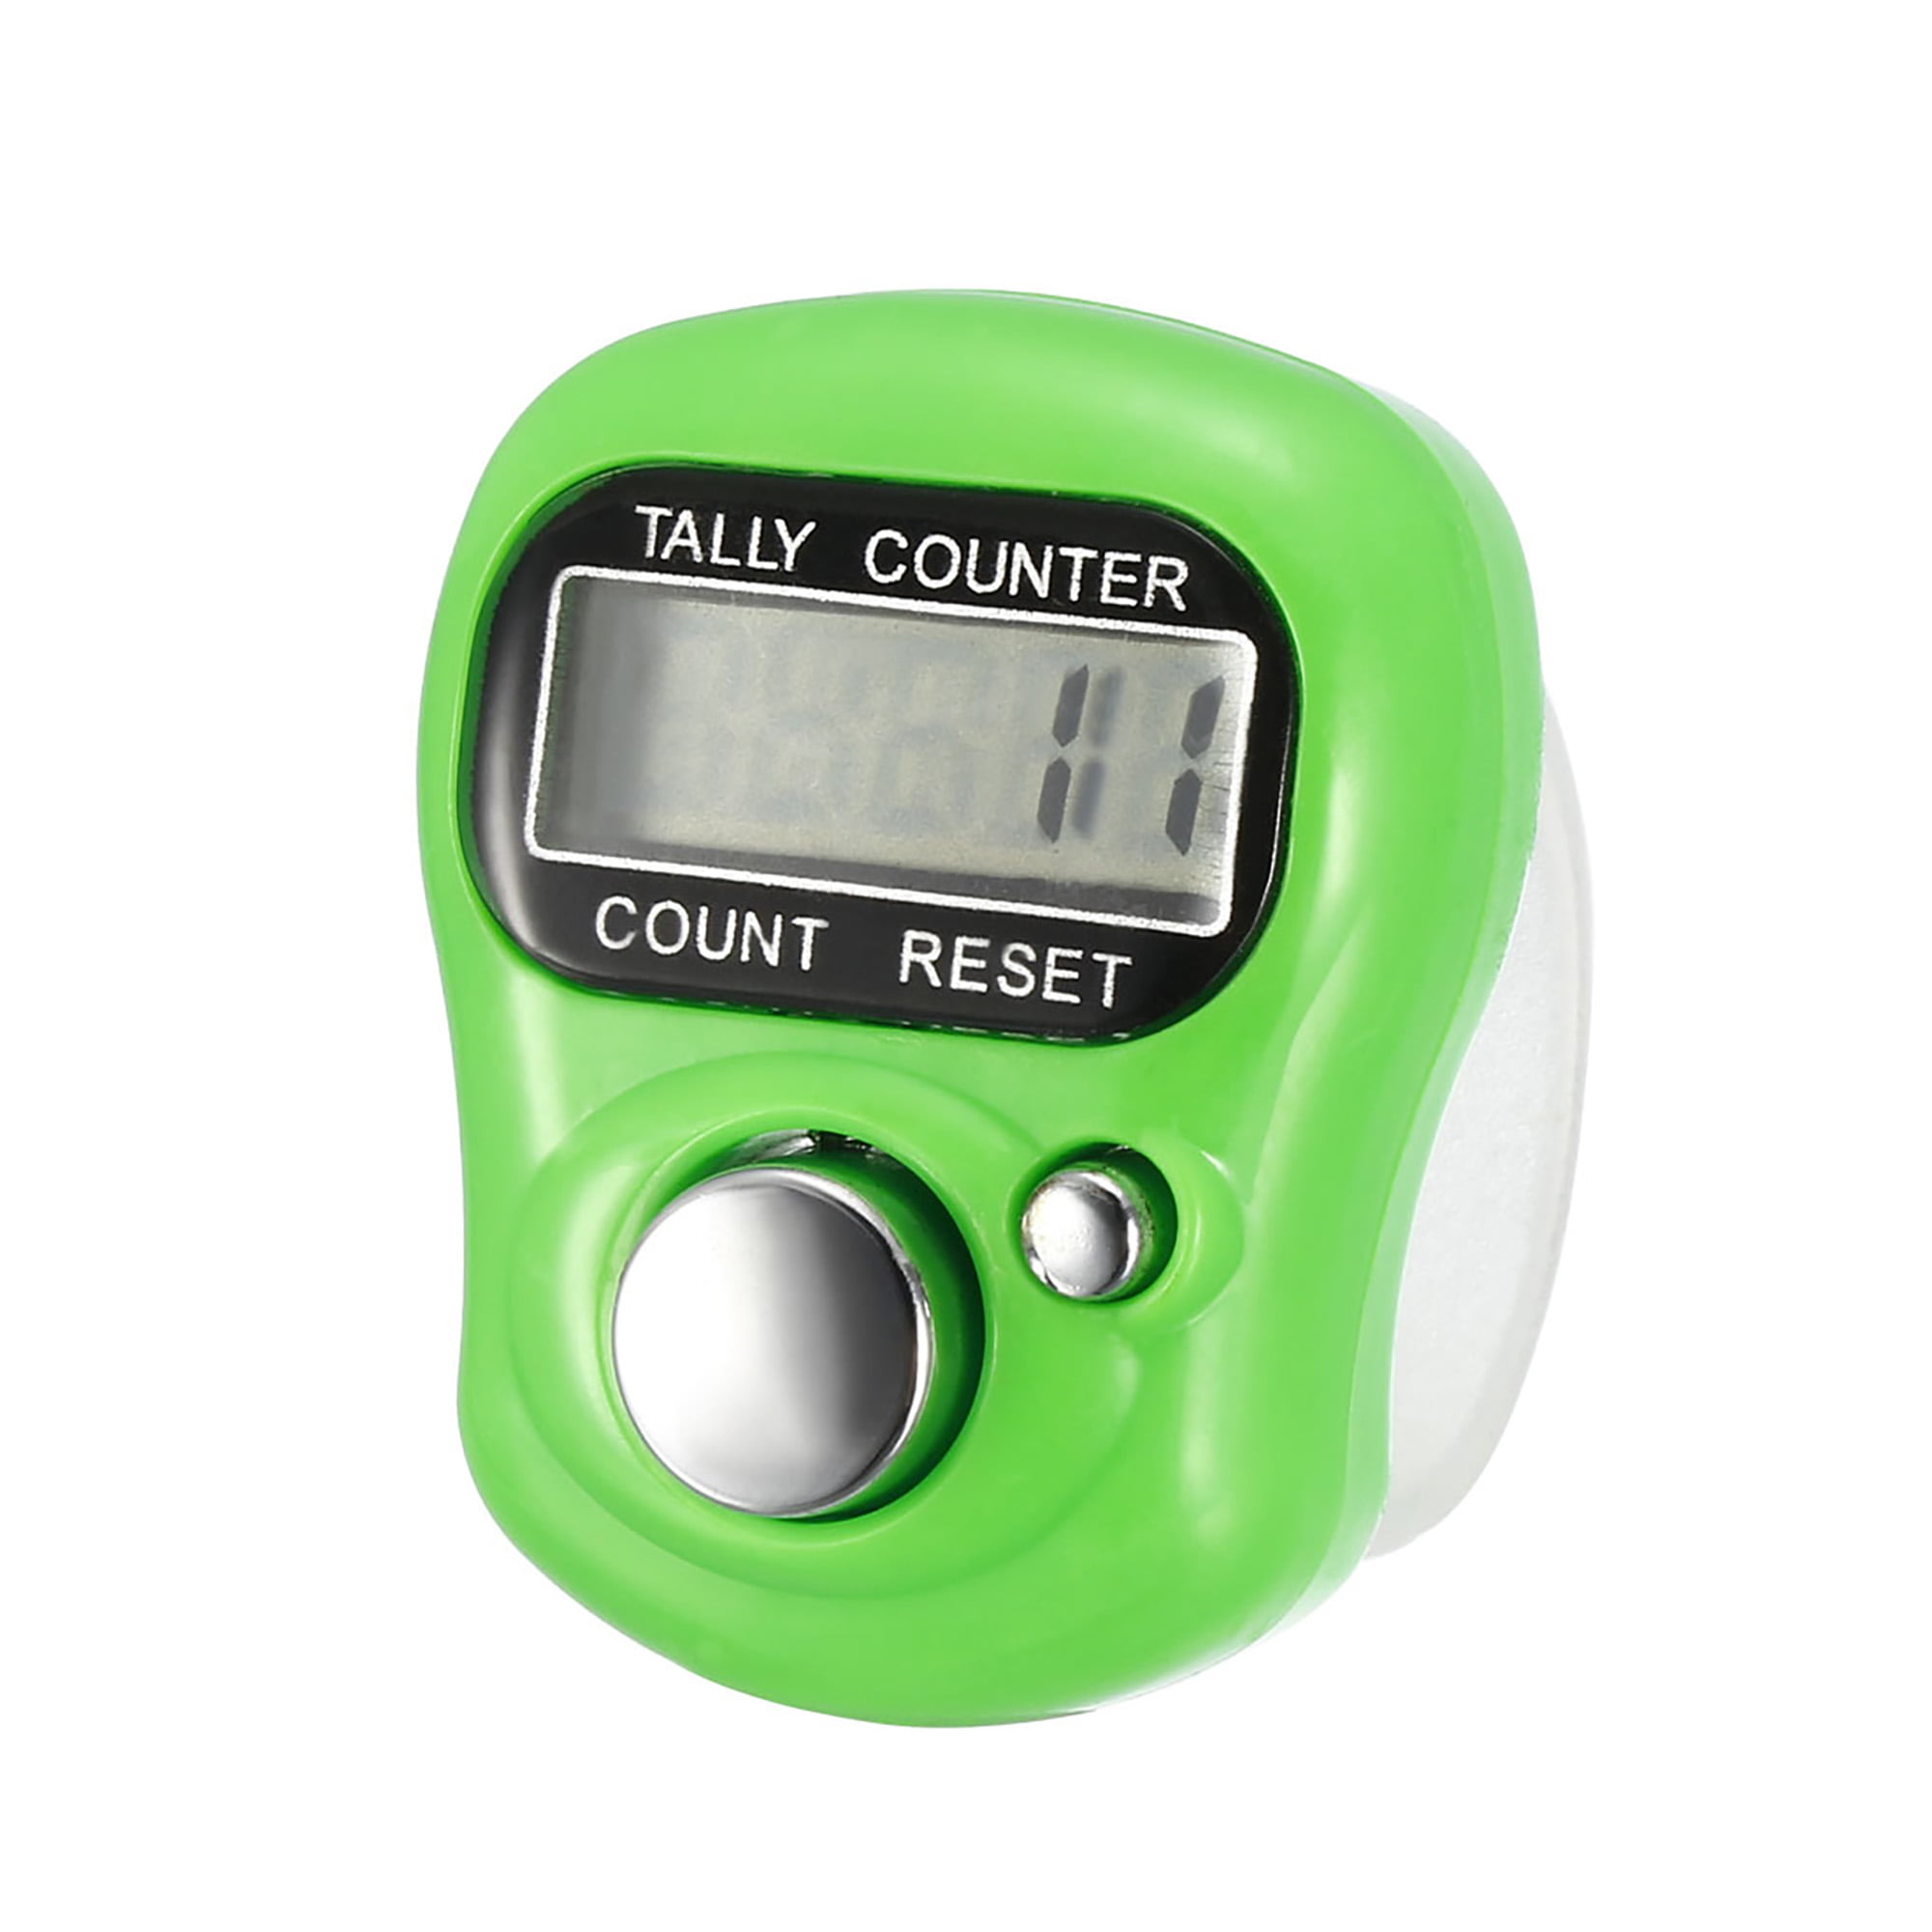 Counter Tally Counter Digital Electronic Counter Clicker Digital Tally Counter